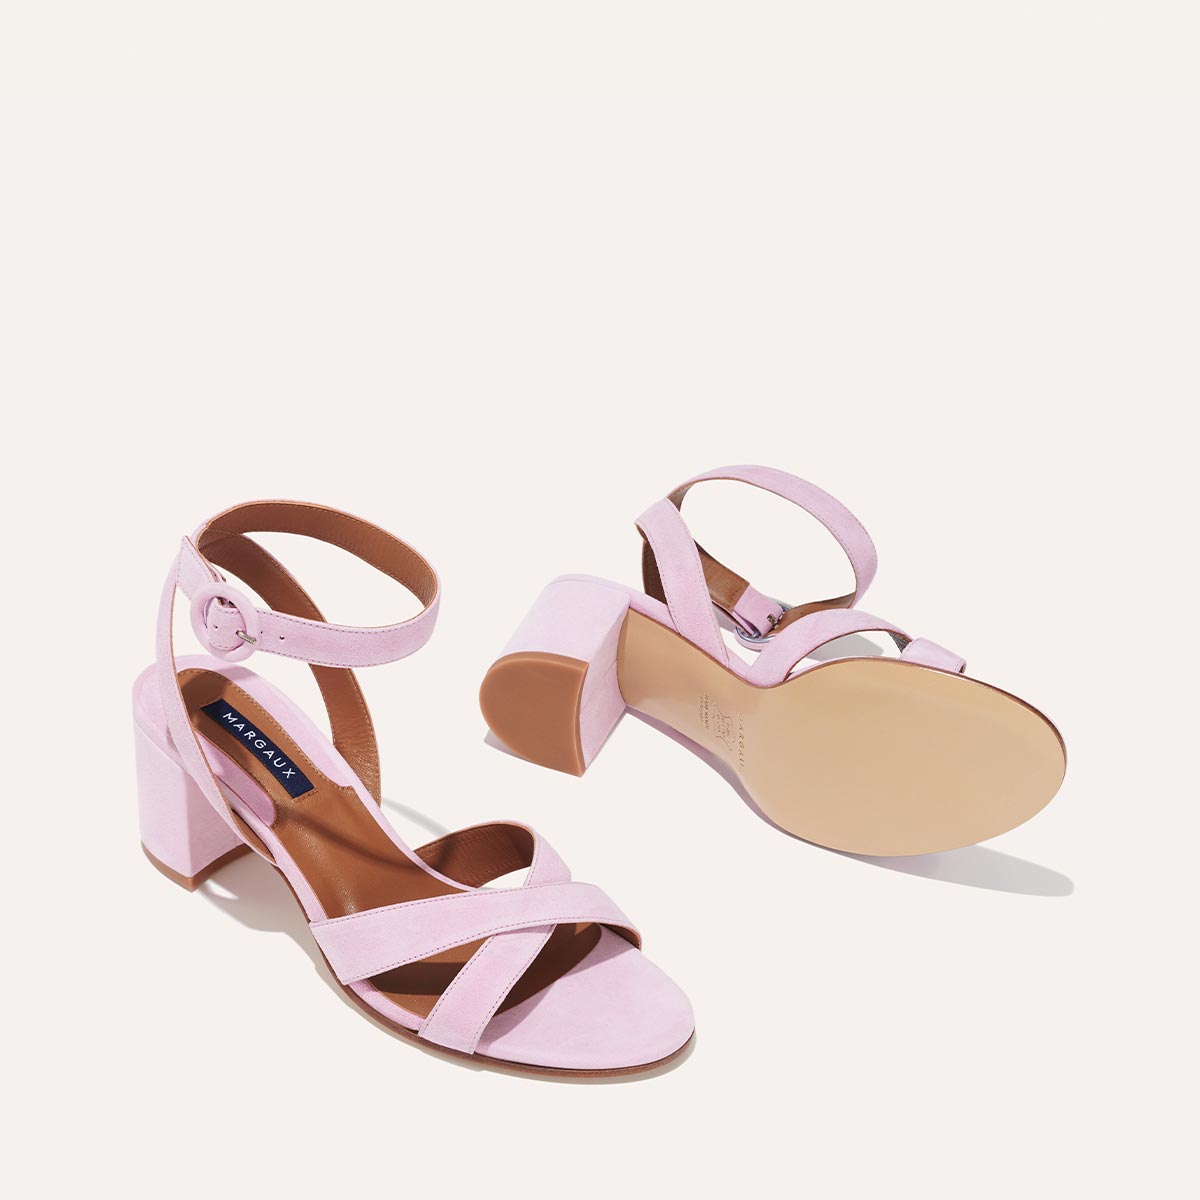 The City Sandal - Wisteria Suede